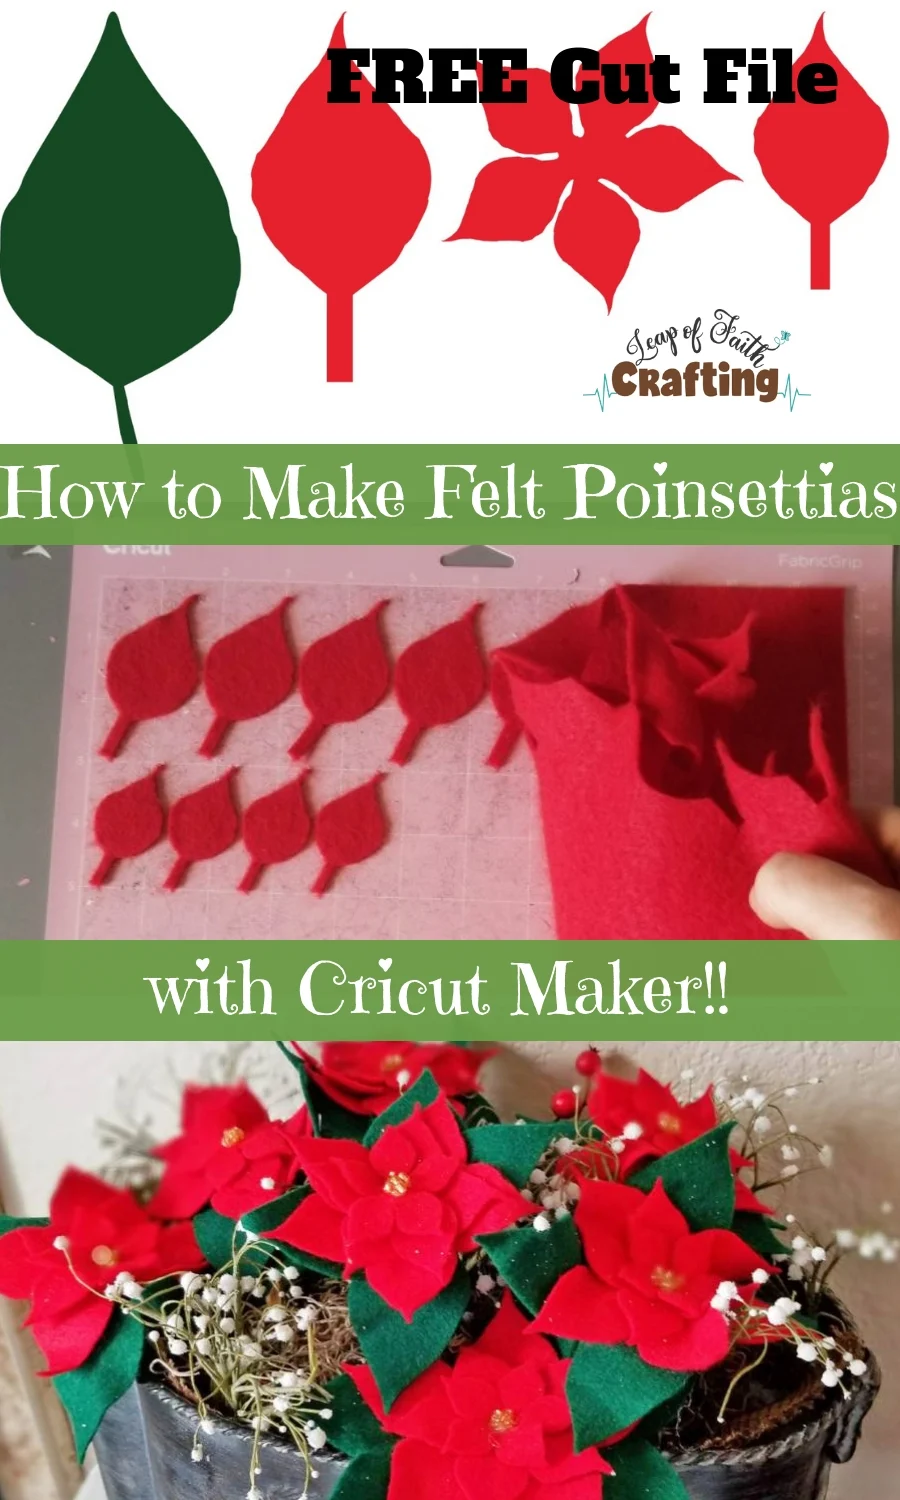 Cutting felt with a Cricut Maker is easy and perfect for making DIY felt poinsettias! Watch a video tutorial on how to put poinsettias together with hot glue. Plus grab the free SVG cut files! #cricutmade #christmas #diychristmas #felt